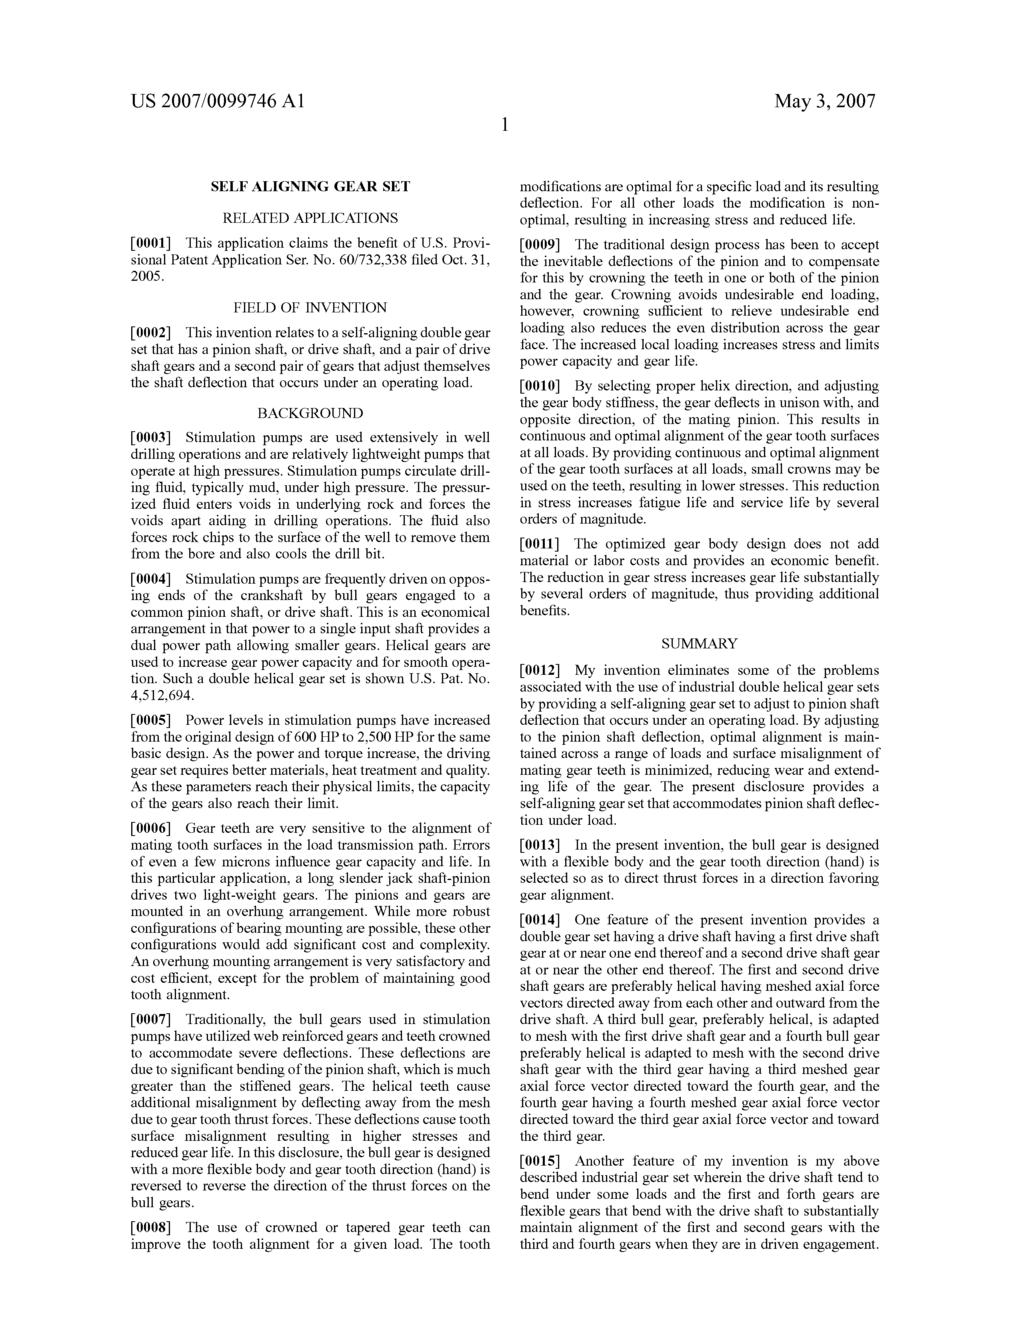 US 2007/0099.74.6 A1 May 3, 2007 SELFALIGNING GEAR SET RELATED APPLICATIONS 0001) This application claims the benefit of U.S. Provi sional Patent Application Ser. No. 60/732,338 filed Oct. 31, 2005.